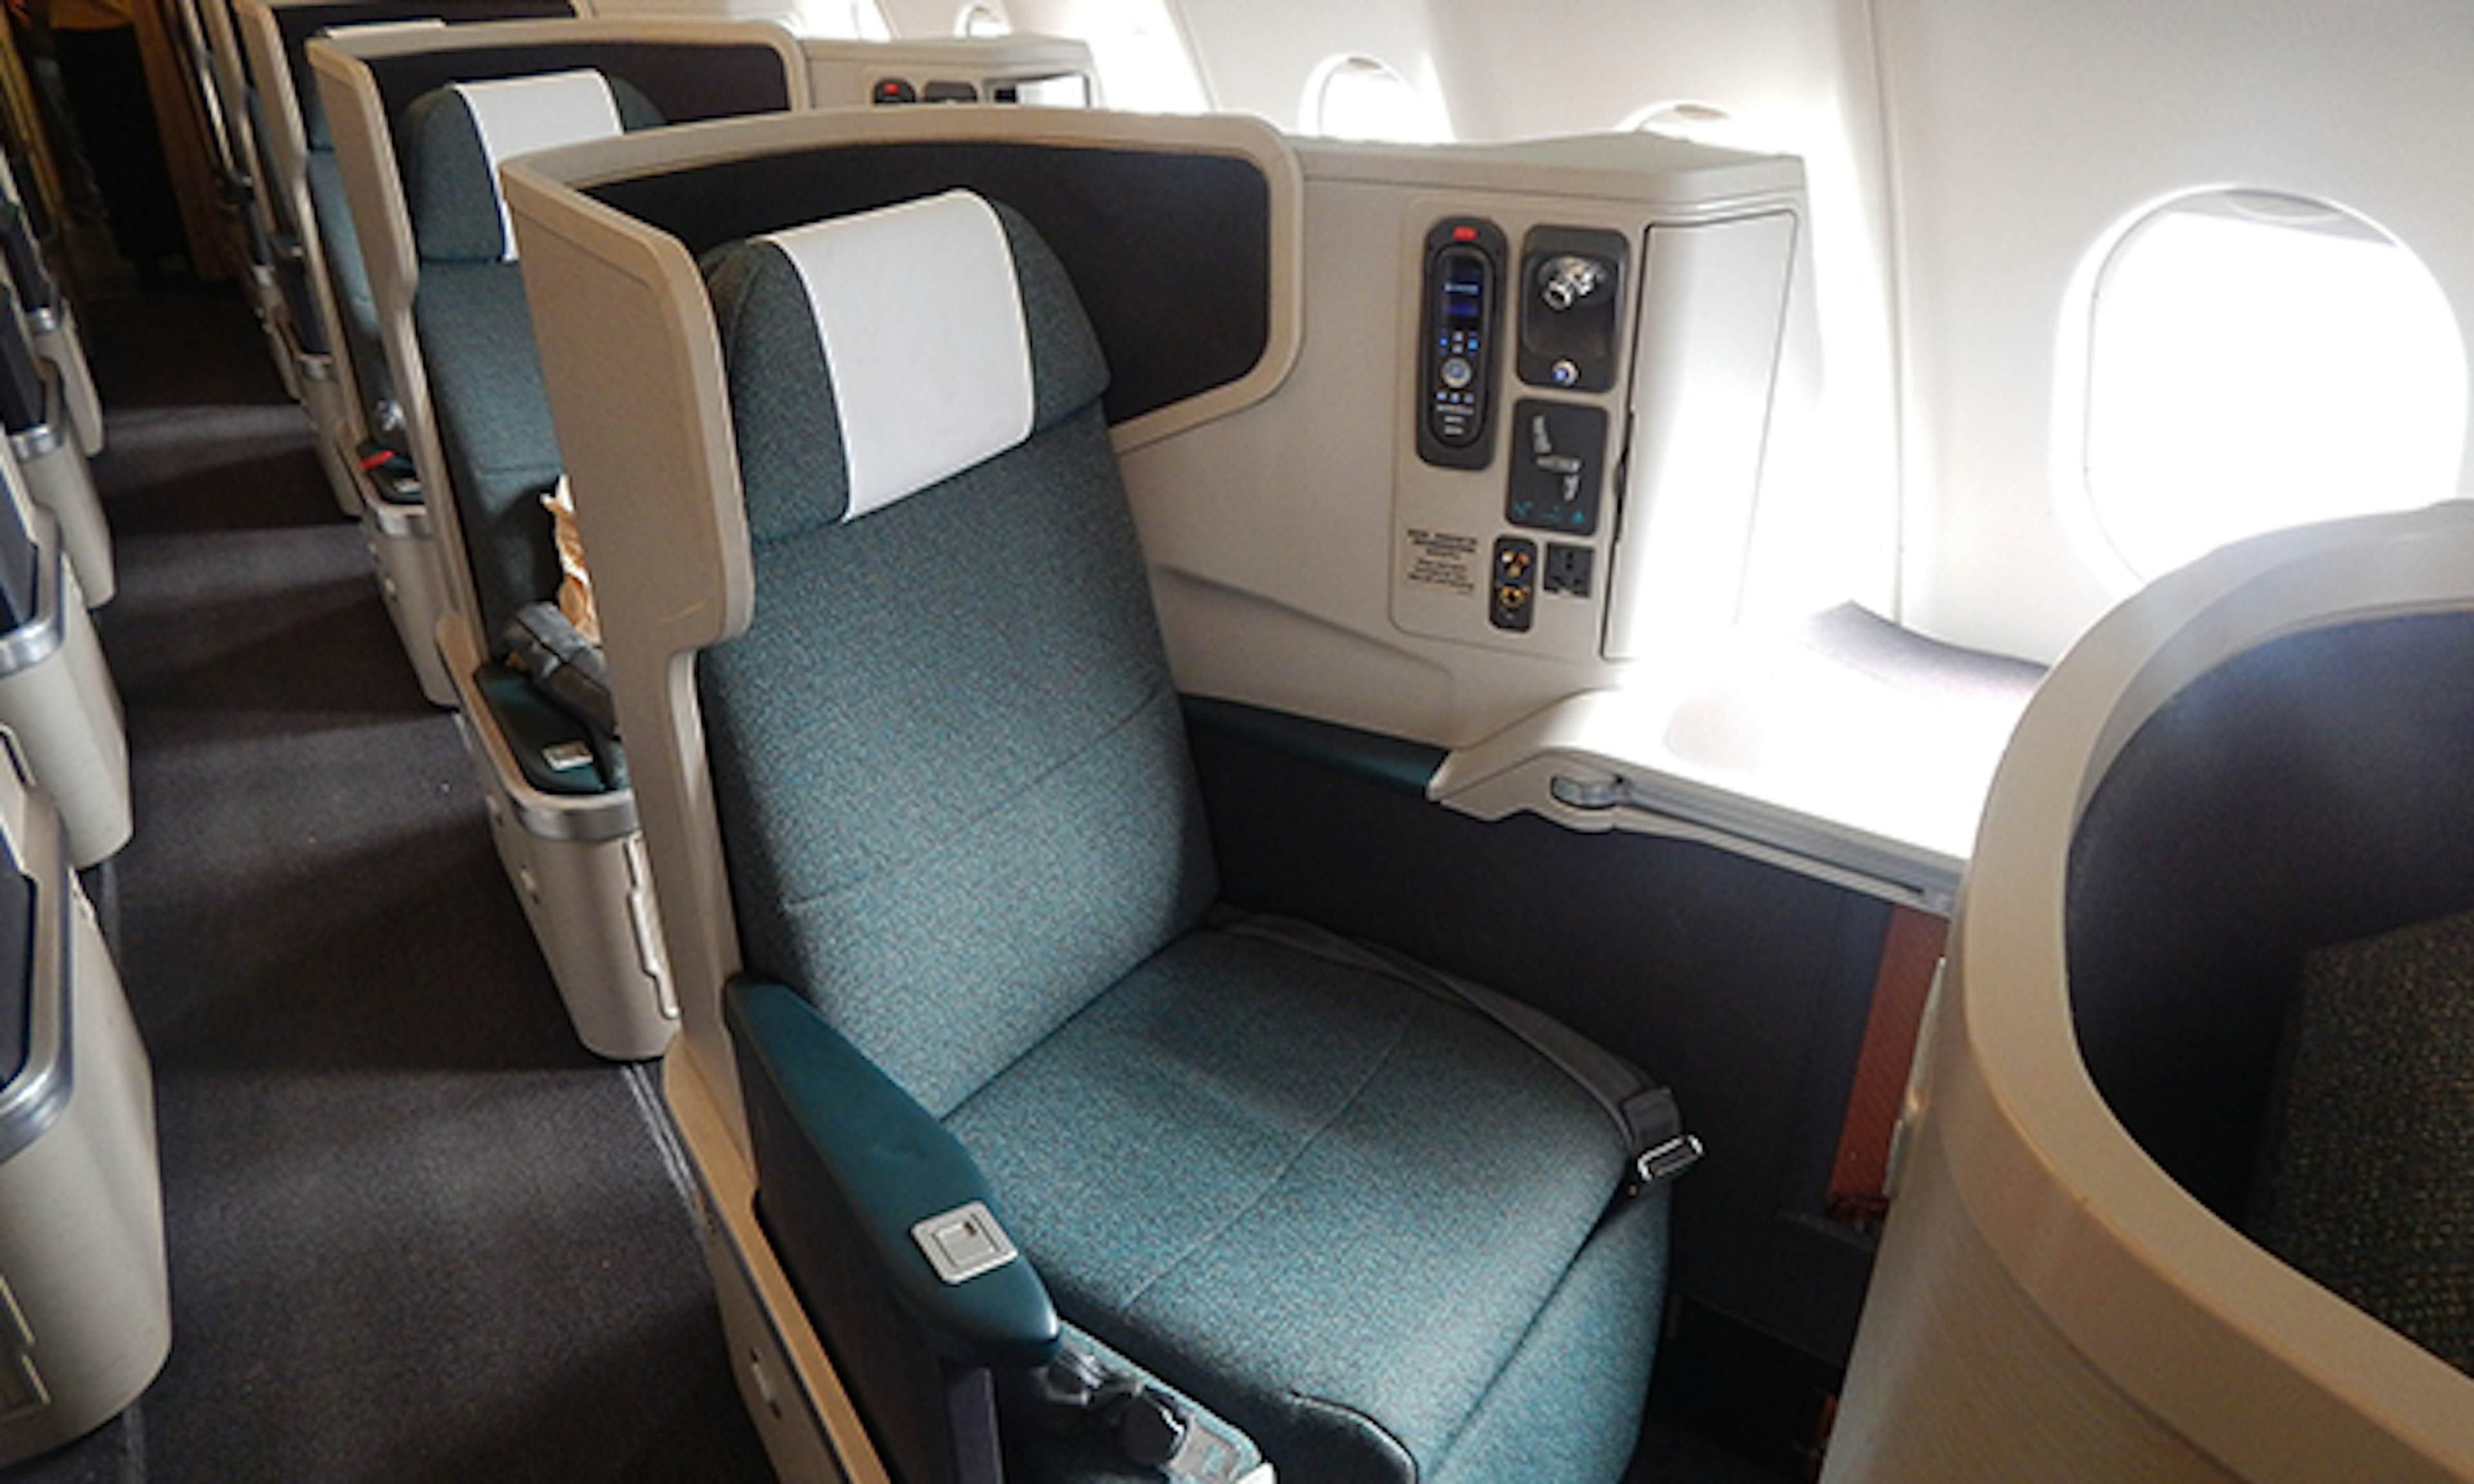 A business class seat onboard a Cathay Pacific aircraft